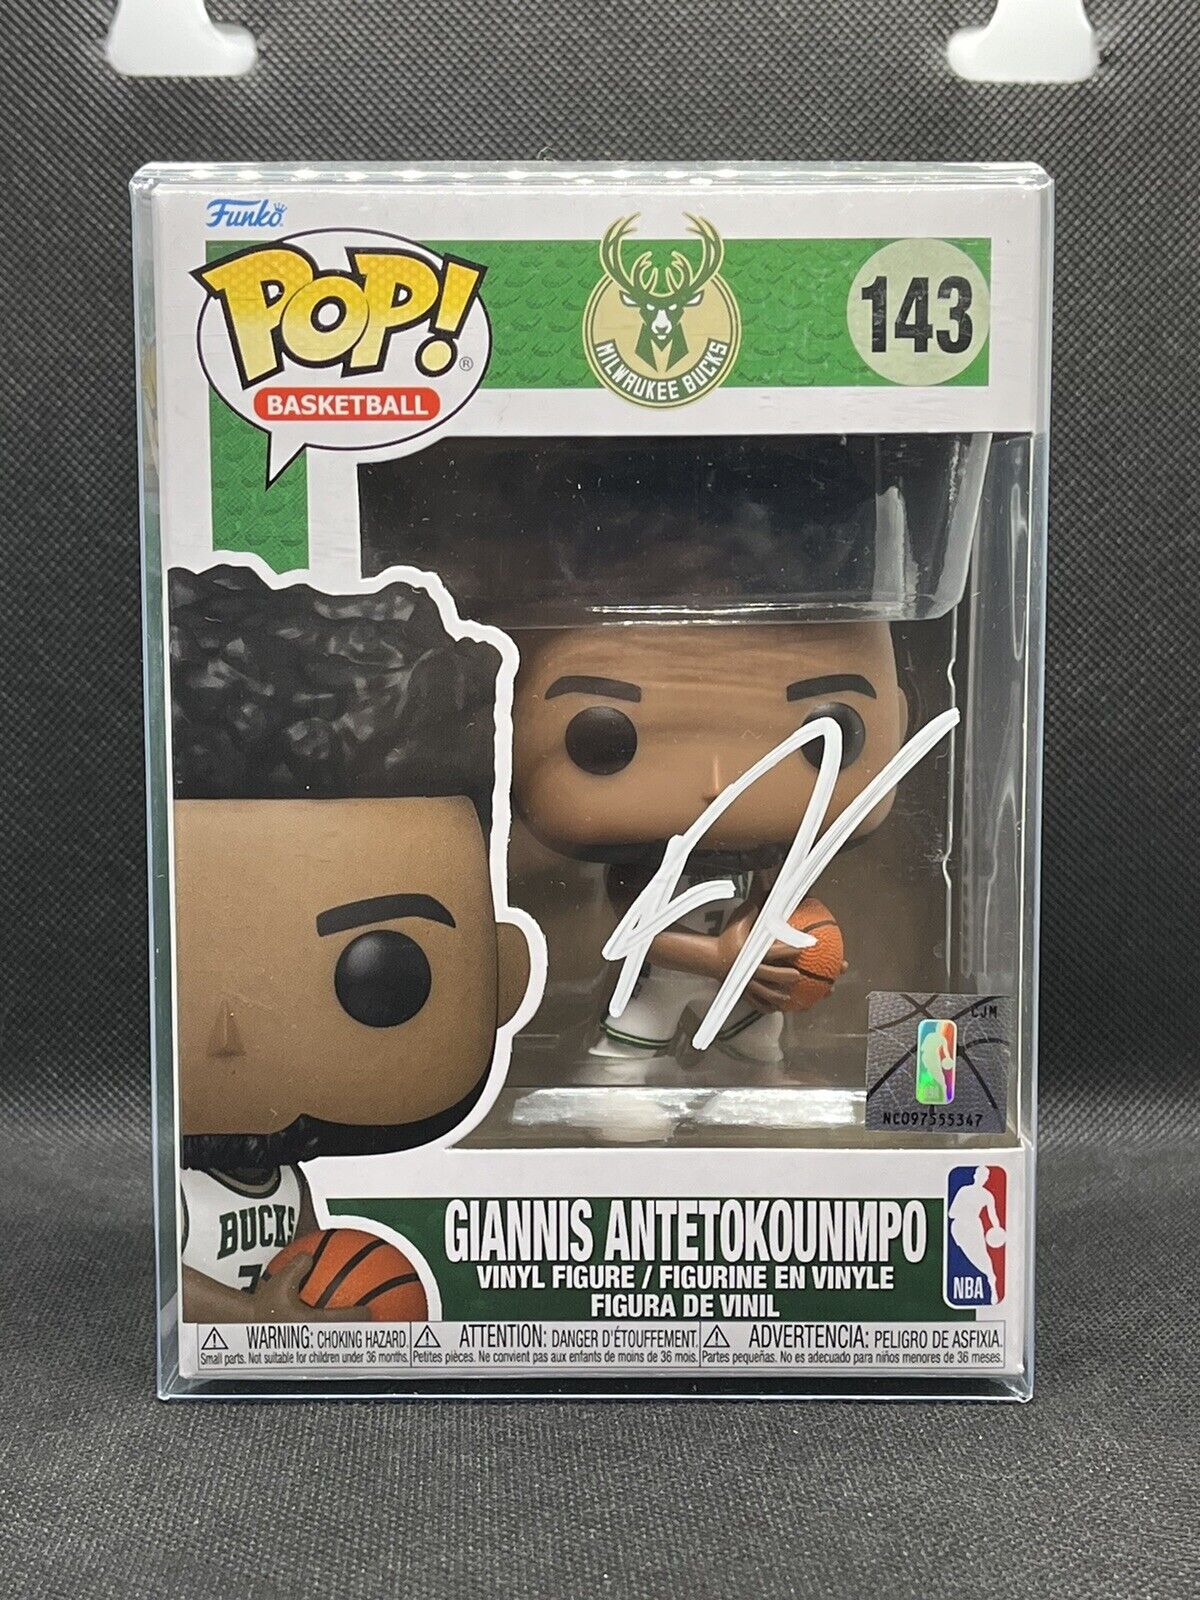 Giannis Antetokounmpo Signed Autographed Funko Pop #143 PSA/DNA Authenticated